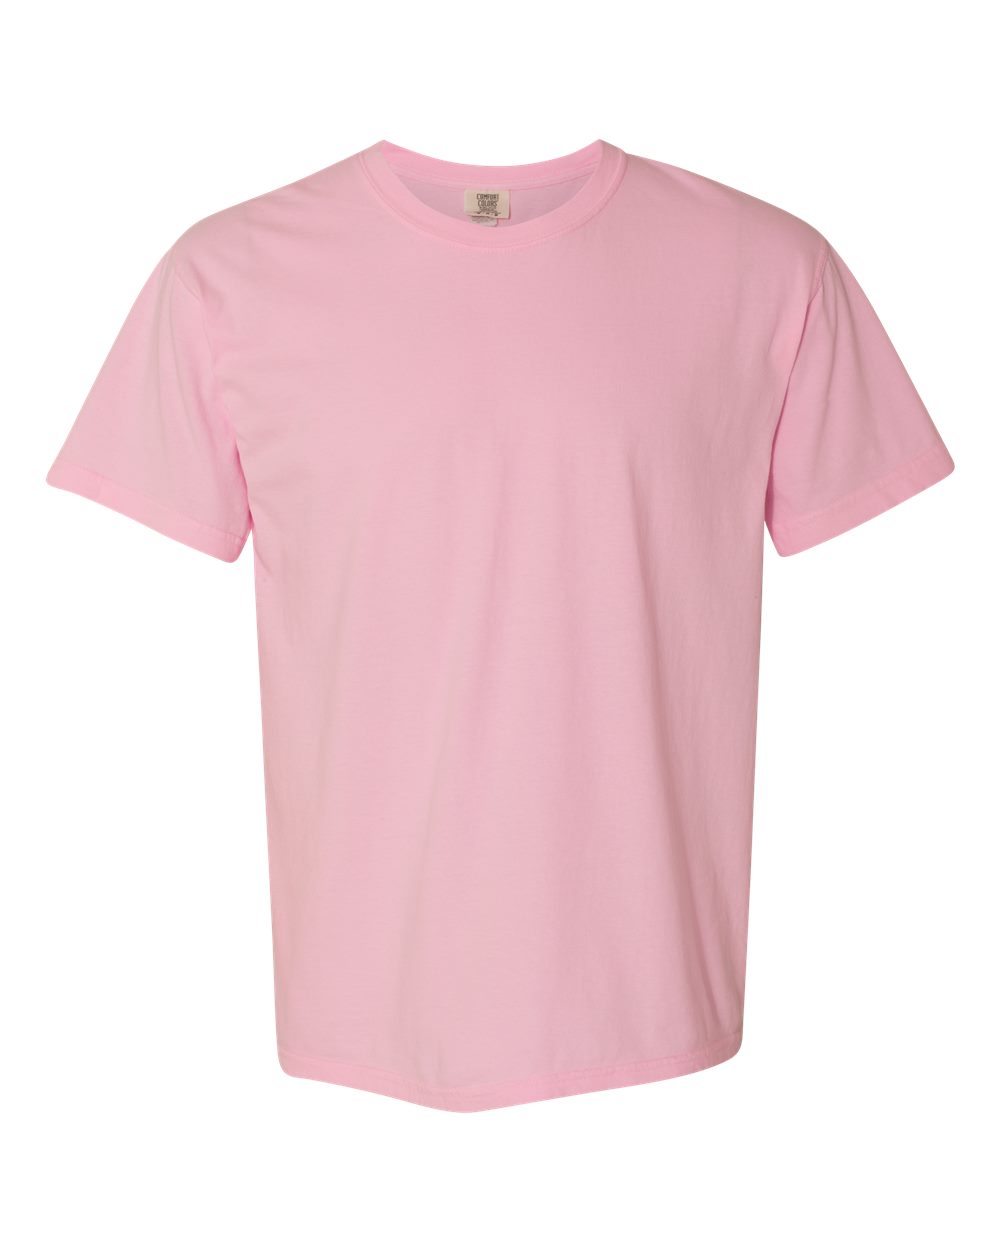 Comfort Colors Garment-Dyed Tee (1717) in Blossom